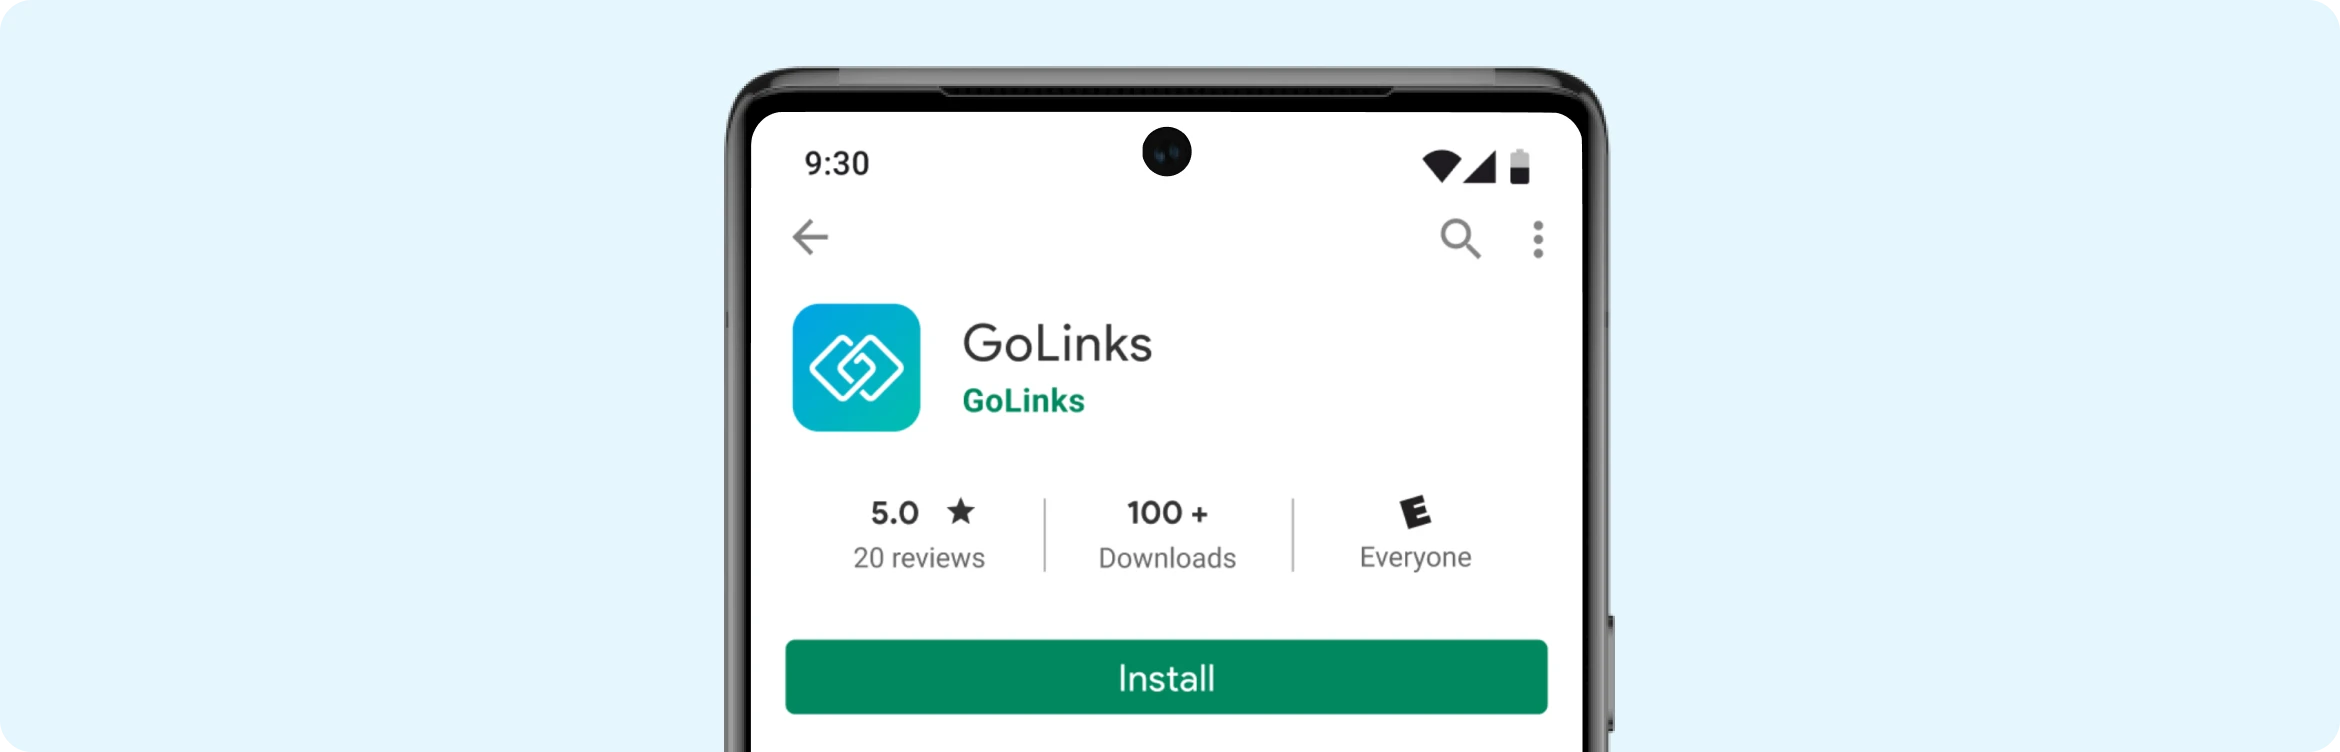 Download GoLinks for free and get access to company resources on Android